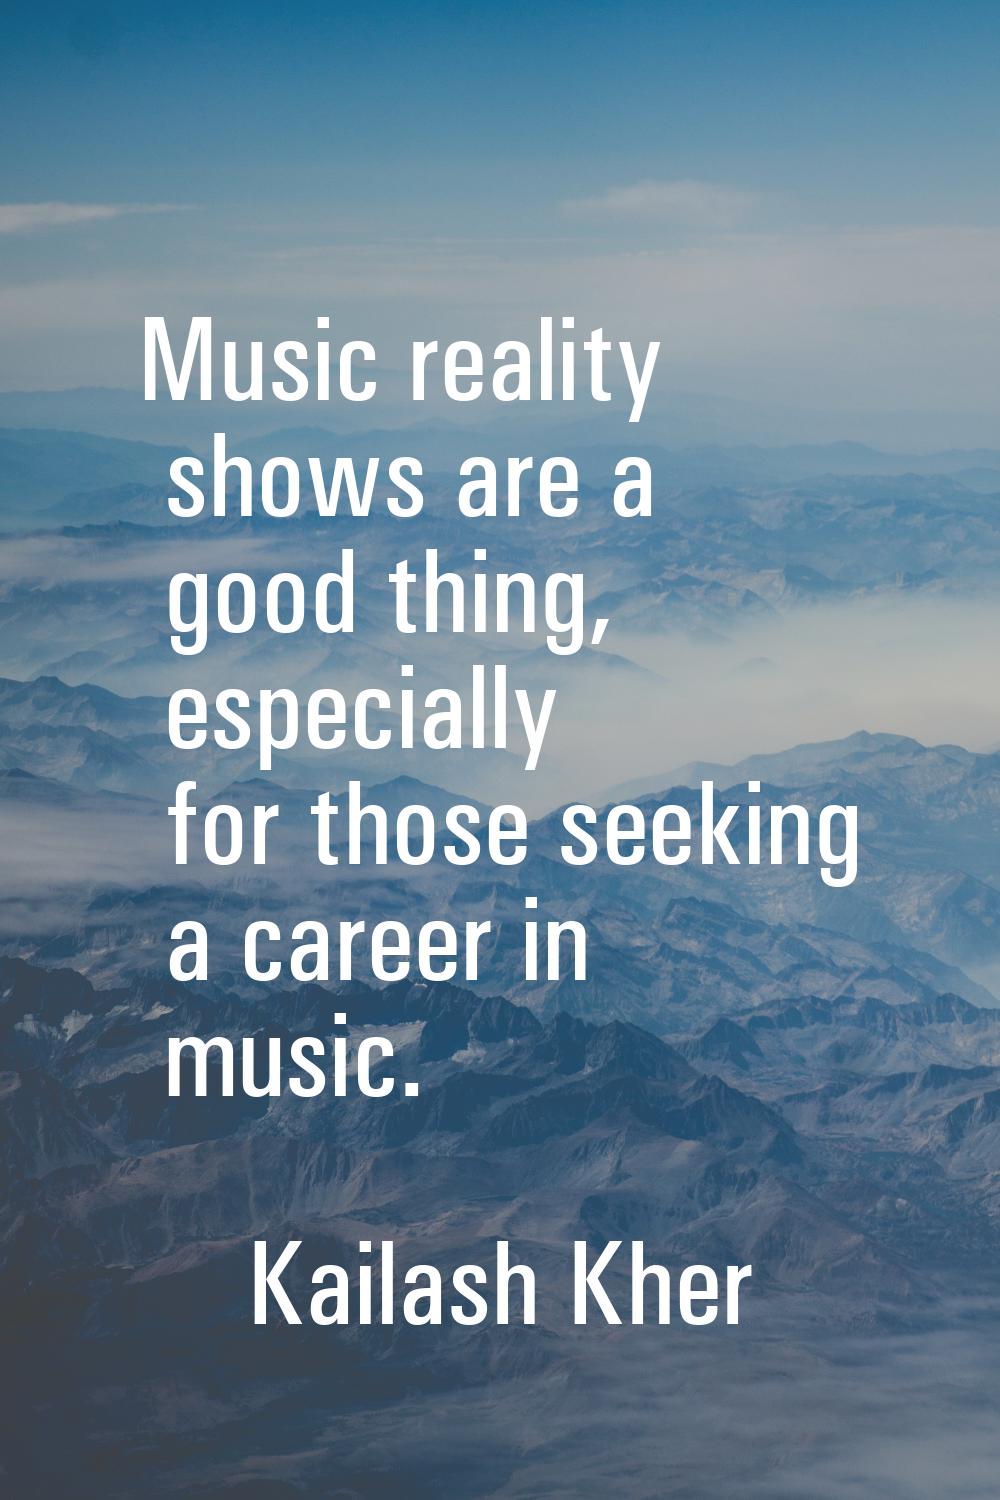 Music reality shows are a good thing, especially for those seeking a career in music.